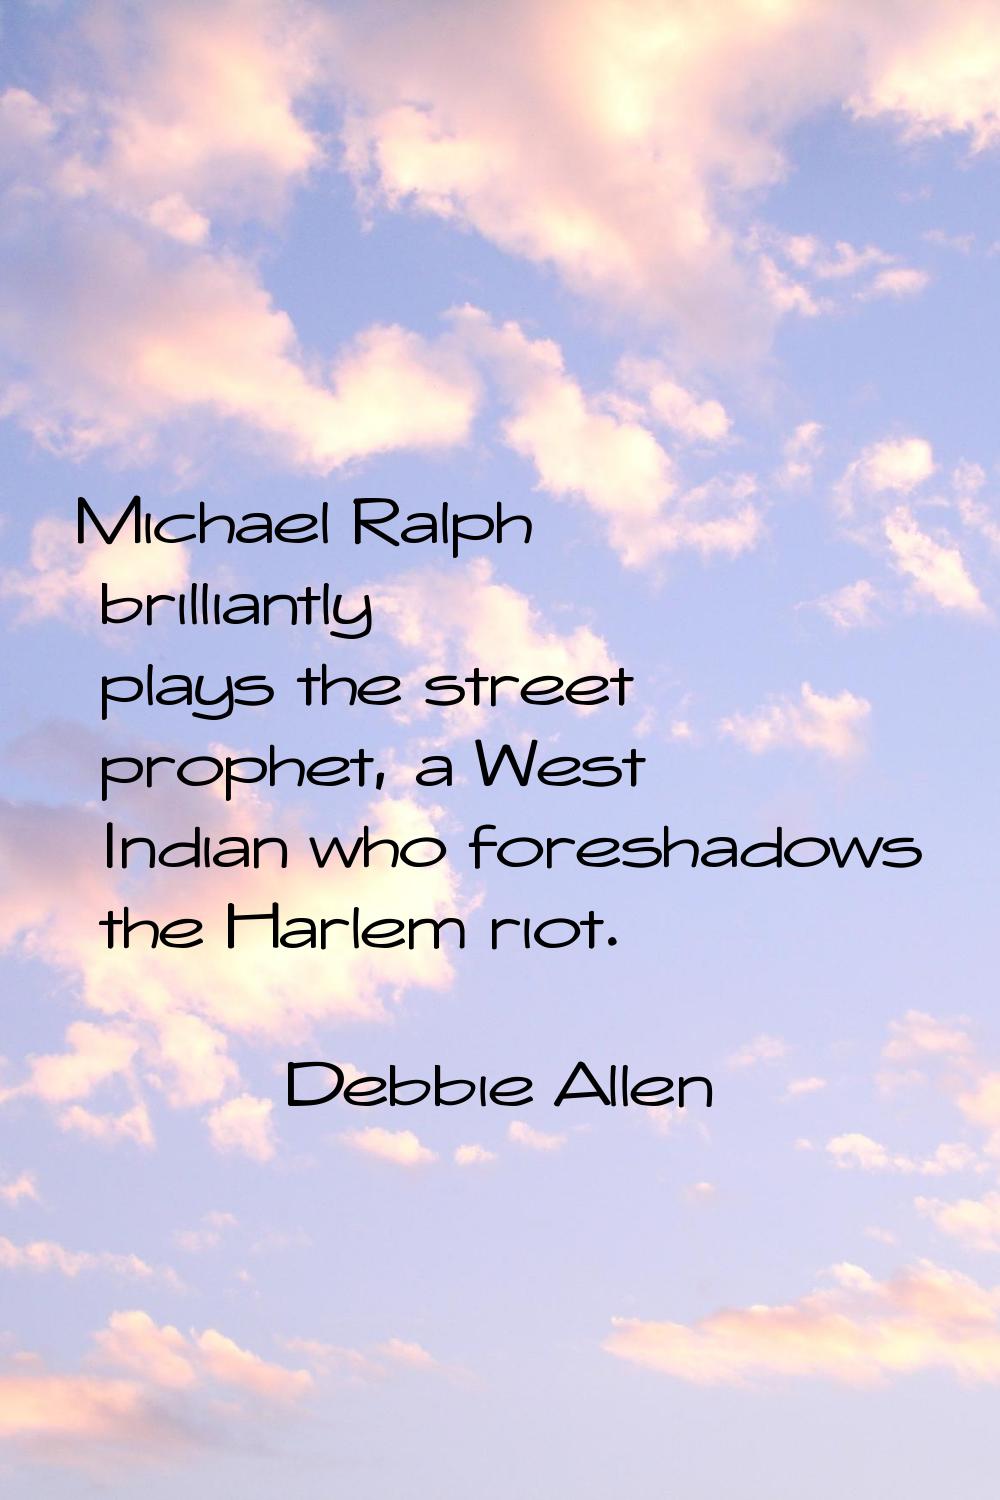 Michael Ralph brilliantly plays the street prophet, a West Indian who foreshadows the Harlem riot.